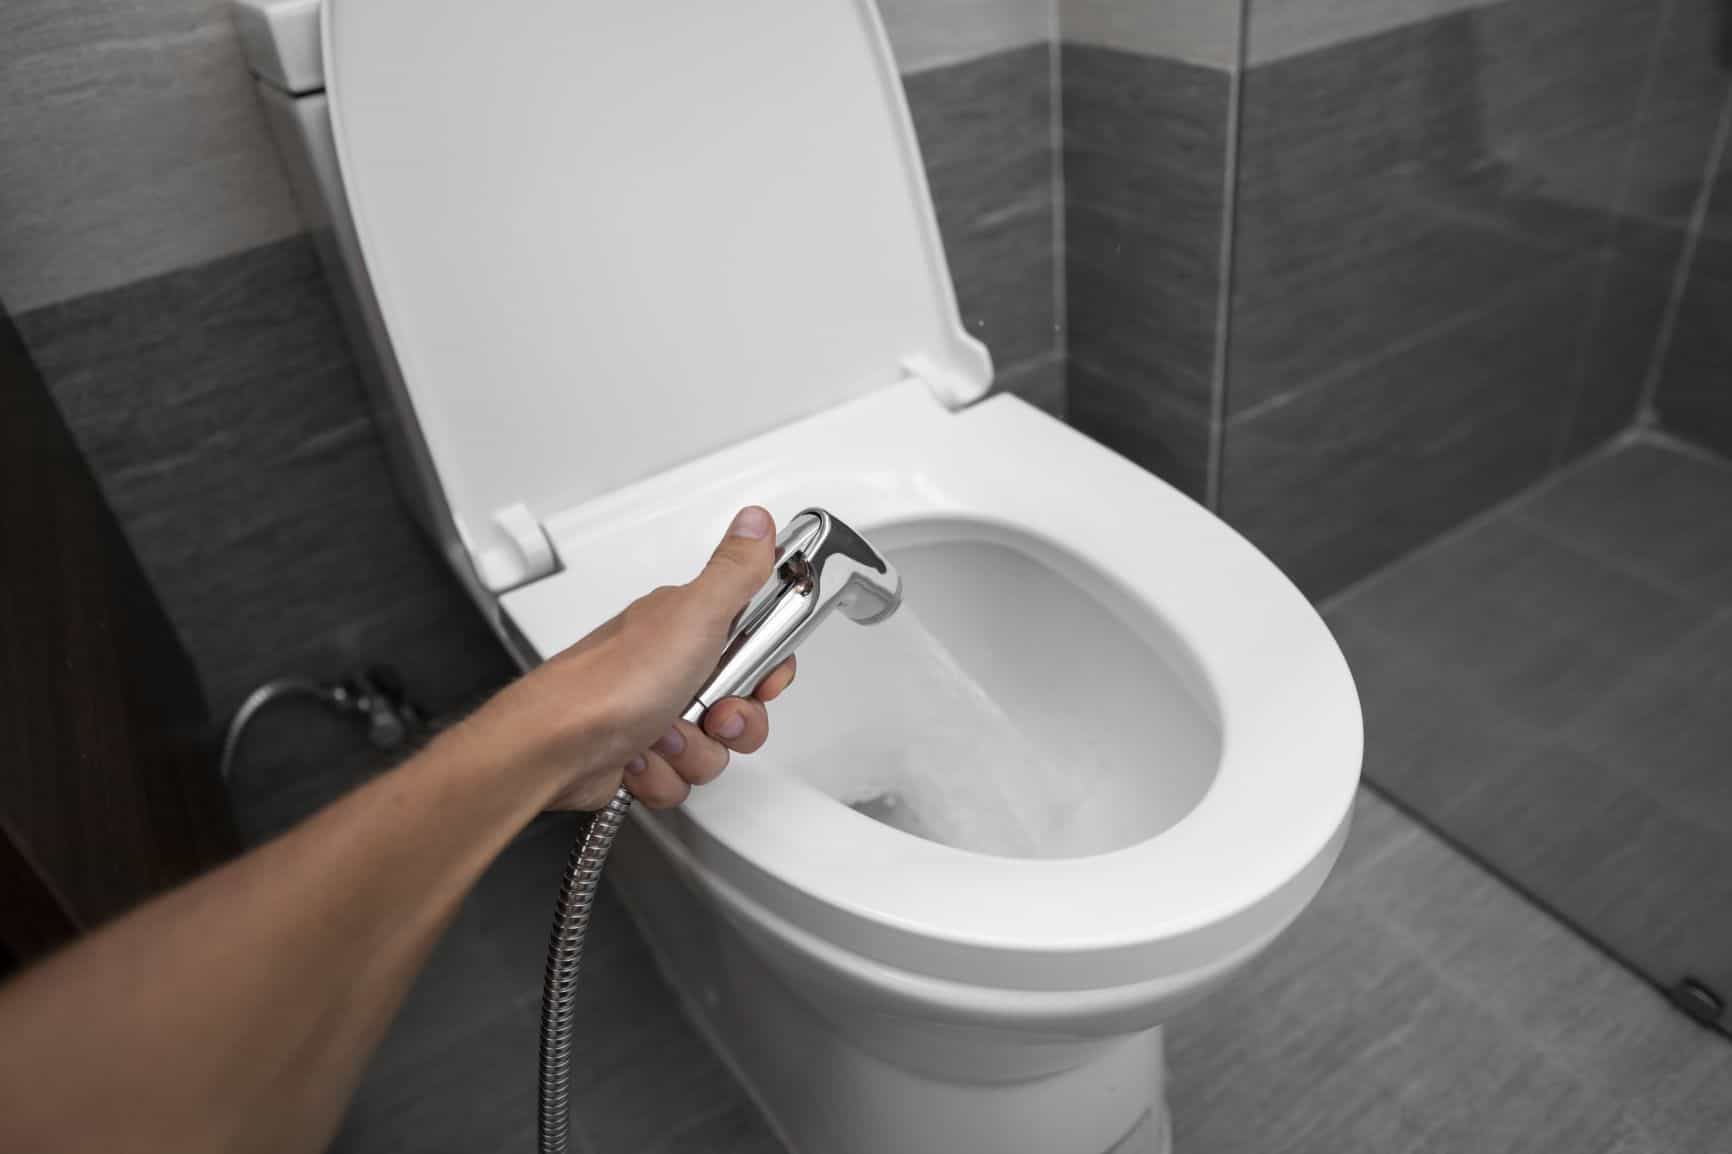 What Is a Bidet, and They Good for the Environment?